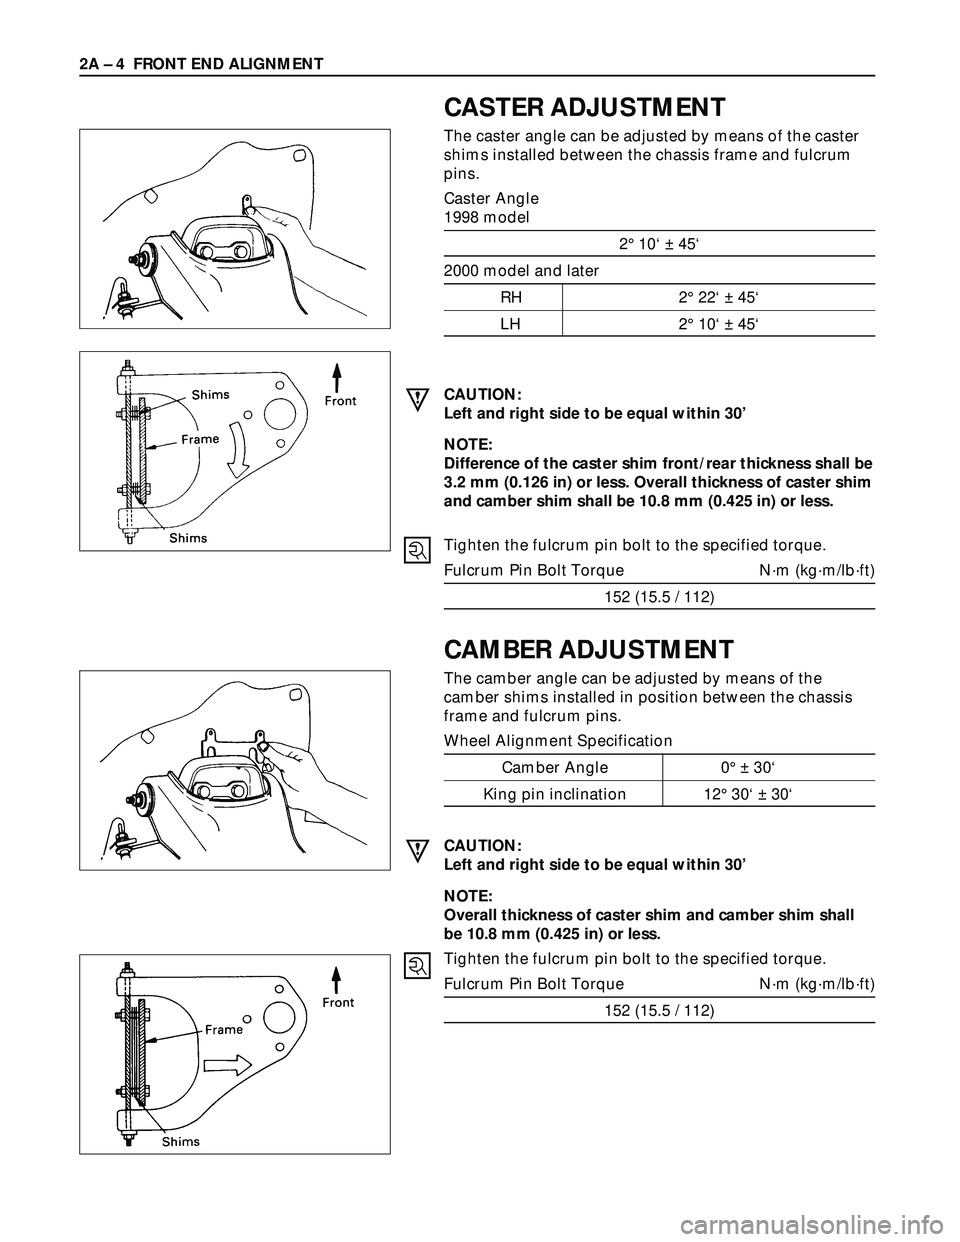 ISUZU TROOPER 1998  Service Repair Manual 2A – 4 FRONT END ALIGNMENT
CASTER ADJUSTMENT
The caster angle can be adjusted by means of the caster
shims installed between the chassis frame and fulcrum
pins.
Caster Angle
1998 model
2° 10‘ ± 